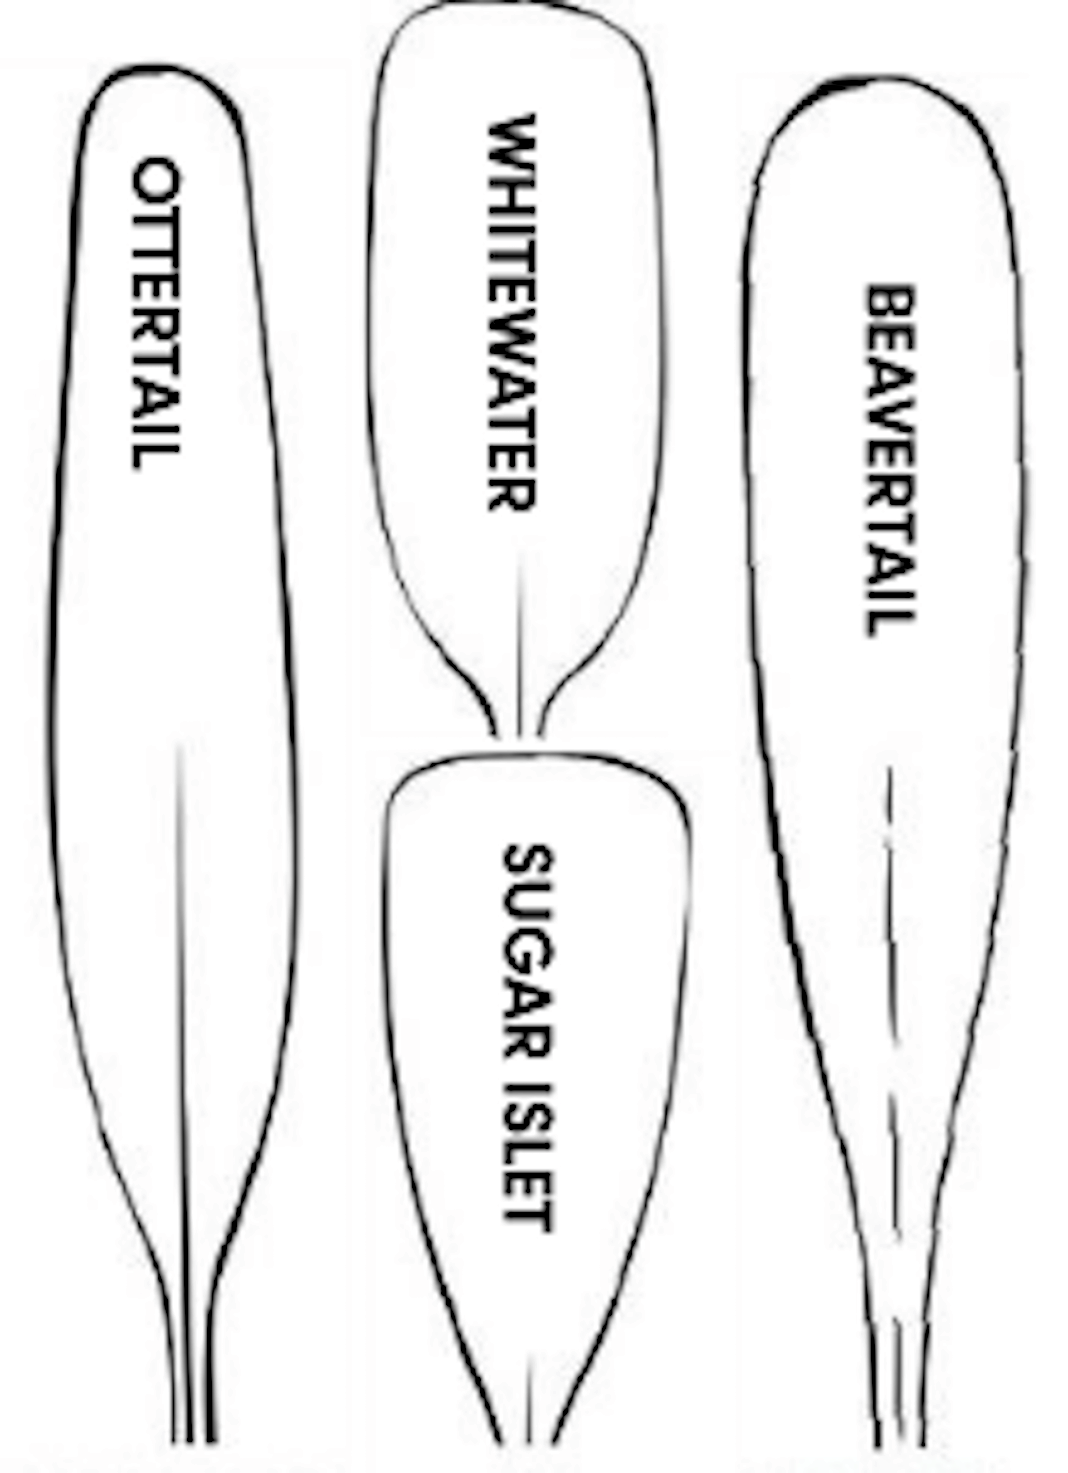 Four different shapes of paddle blades